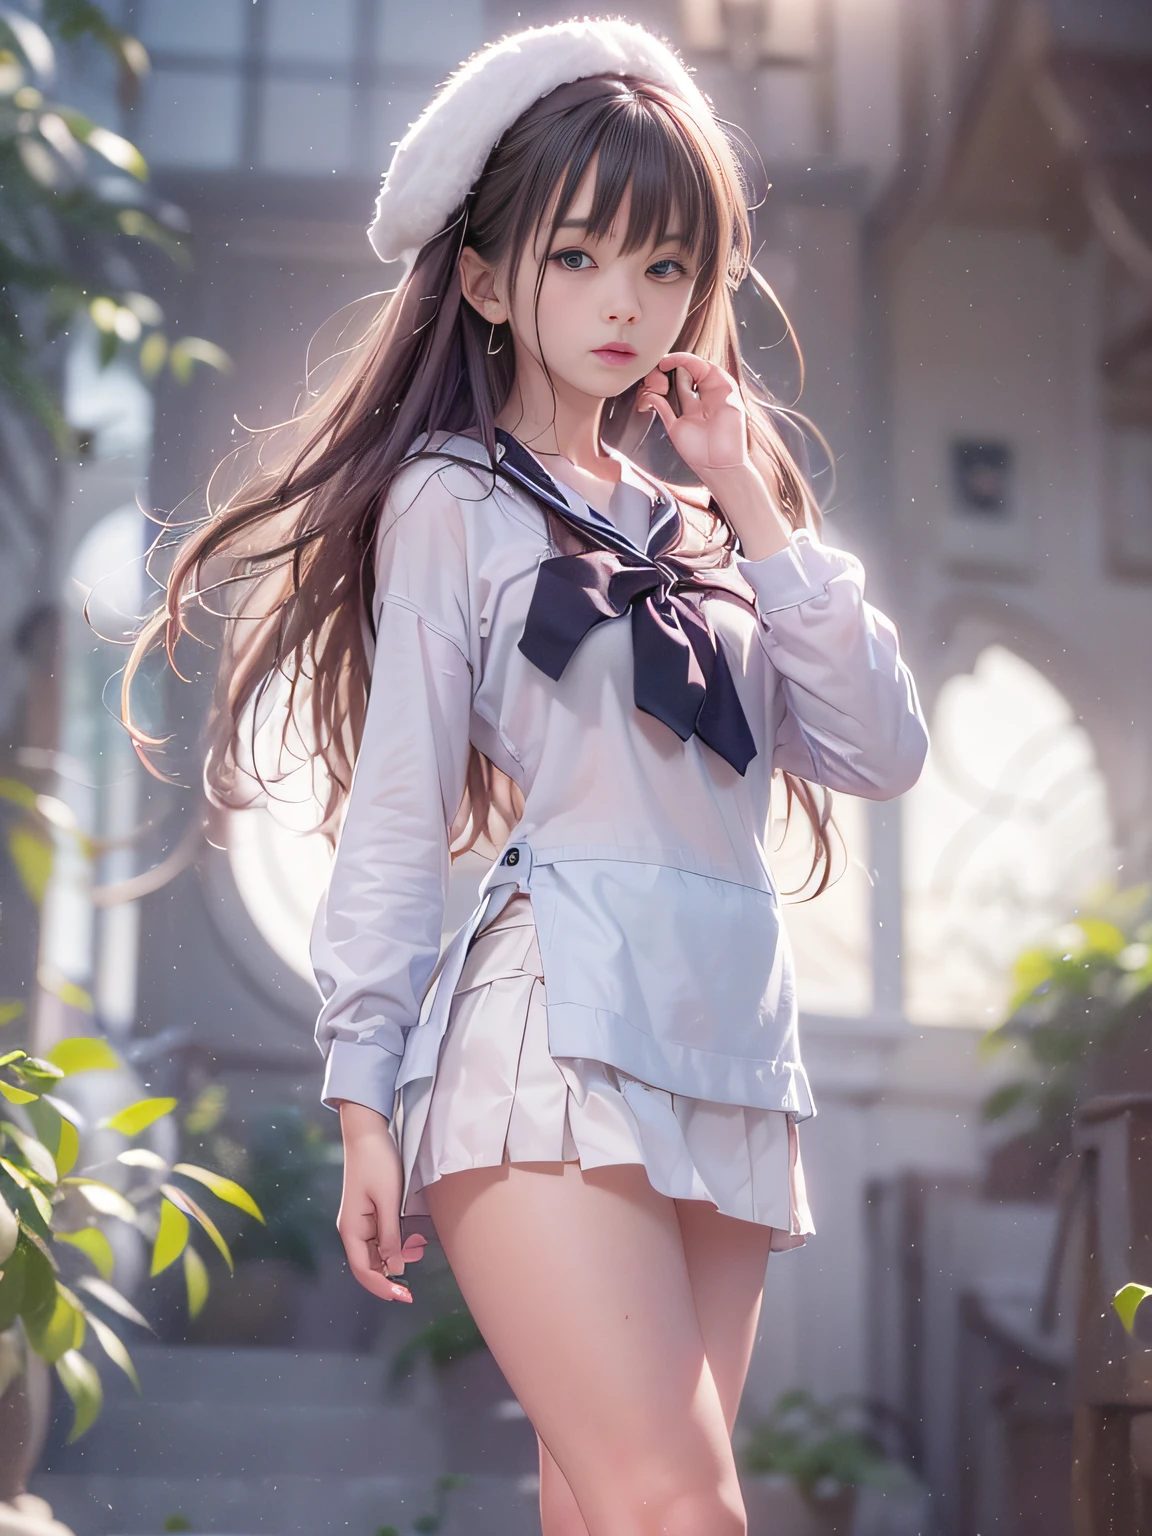 Highly detailed background，Realistic，Ultra-detail，super detailed skin，Detailed beautiful face and eyes，retinas,Anatomically correct, Textured skin, masutepiece, Super Detail, Best Quality, awardwinning, hight resolution,Junior high school students who remain young,ultimate beauty girl，a sailor suit、pleatedskirt、(Knee-length skirt:1.7),((skirt rift:1.6)),eye glasses,((small ,Thin leg)),girl with１a person,a 14 year old girl,solo,Wearing underwear,Smaller face,smooth hair，detailed hairs，Very fine hairs，realistic facial expression,(Face to feel:1.6),Enchanted,Nasty look,(o-face:1.4),Functional,milky skin,Soft lips,various poses shooting photos,Full body portrait,slim figure,delicated face,cute  face,a beautiful detailed girl,extremely detailed eye and face,beatiful detailed eyes, School building colors々Nice place, Raw photo,Expression in love,Shyness,Longing for love,Sex appeal in girls,Unique natural gestures of girls,Sexy gestures,(Masturbation touching the underwear of the chest or skirt over the clothes),Color makeup，Lowered eyebrows，Whitening effect，Raw photo，Gentle lighting，thin and thin eyebrows，eye bags，Ephemeral Girl，A look tinged with joy))，Very soft lighting，Eight-headed body，light glow，Film grain，According to II，Lens Flare，Sharpen，cinematic shadow